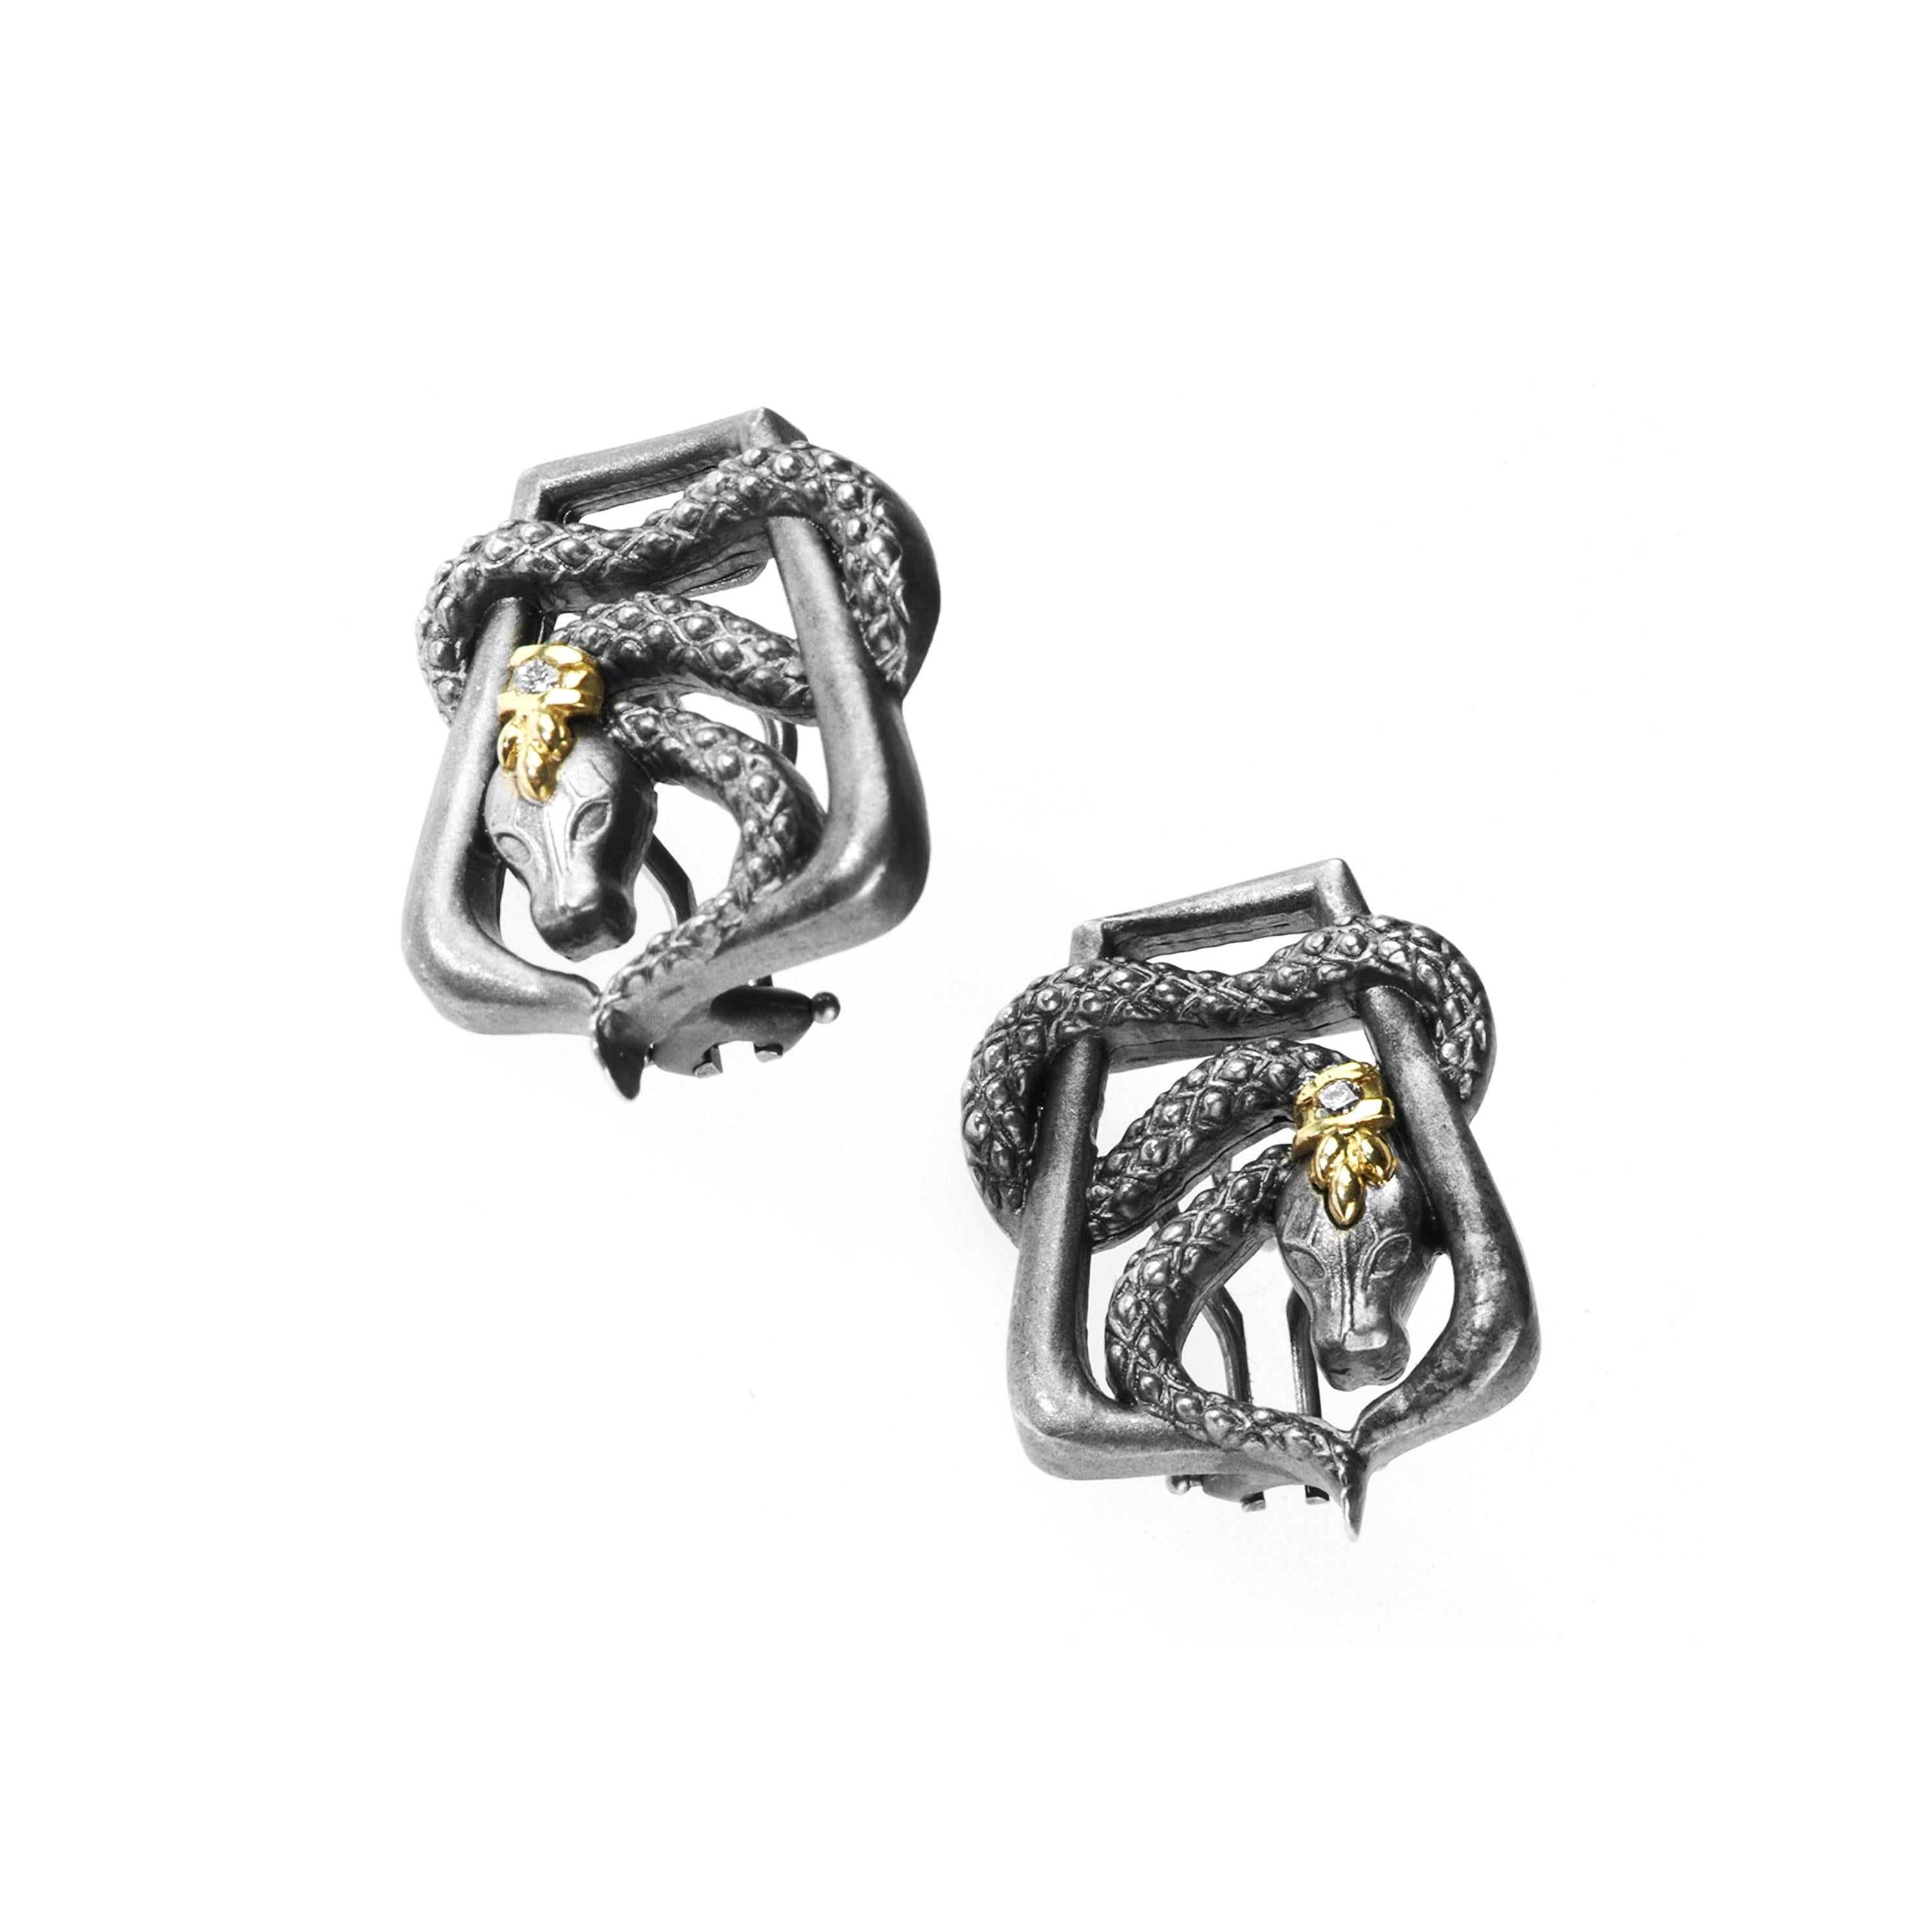 IF YOU ARE REALLY INTERESTED, CONTACT US WITH ANY REASONABLE OFFER. WE WILL TRY OUR BEST TO MAKE YOU HAPPY!

Aged Silver & 18K Gold and Diamond Snake Cufflinks by Stambolian

0.04 carat diamonds

These Cufflinks are from the Stambolian 